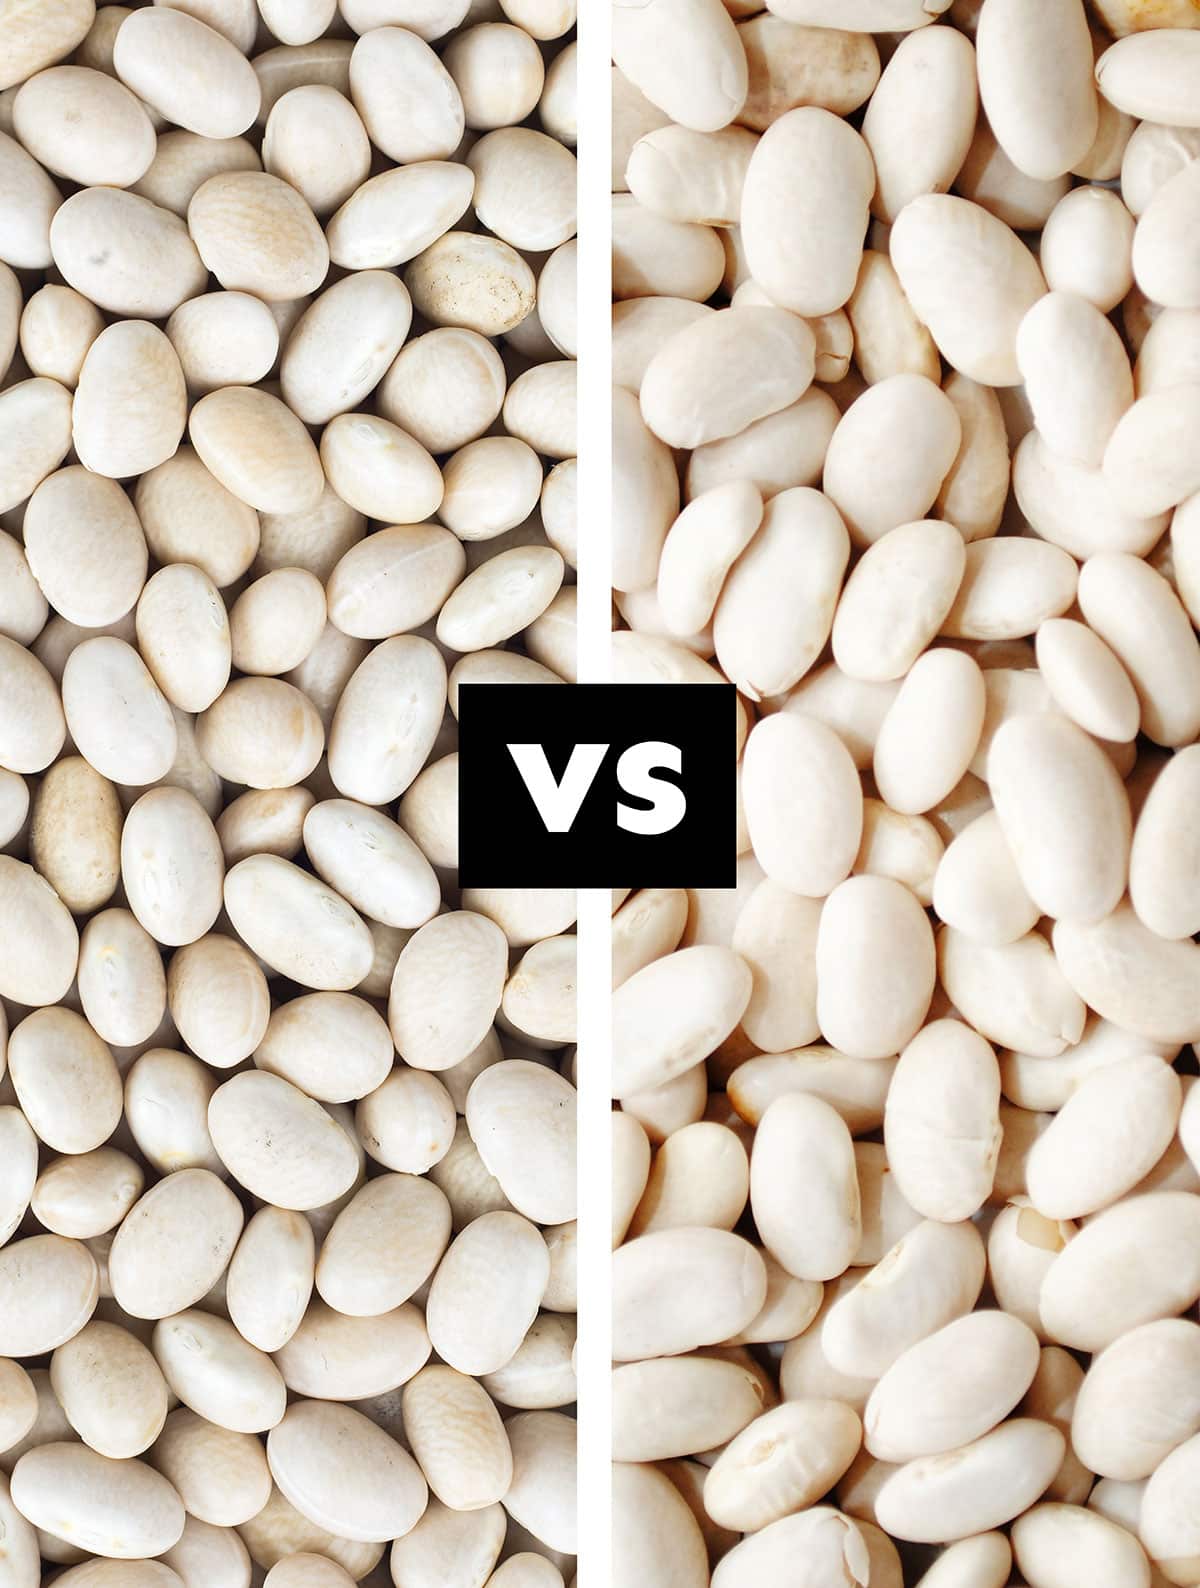 Navy beans vs great northern beans.